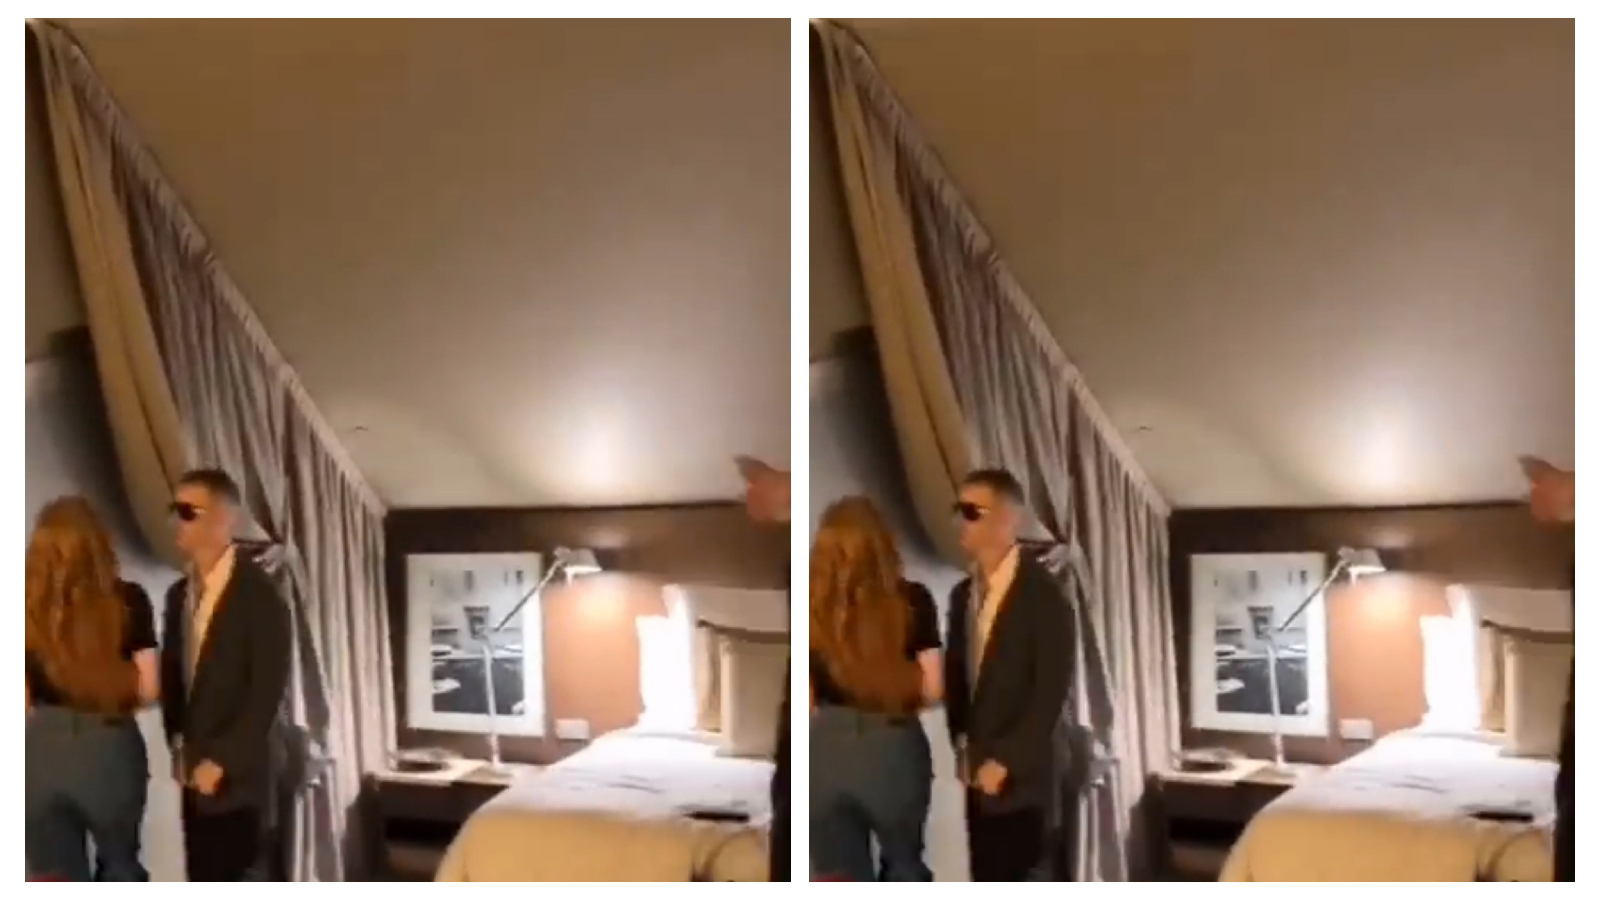 Jessica Chastain, Jeremy Strong dance to Madonna in hotel room